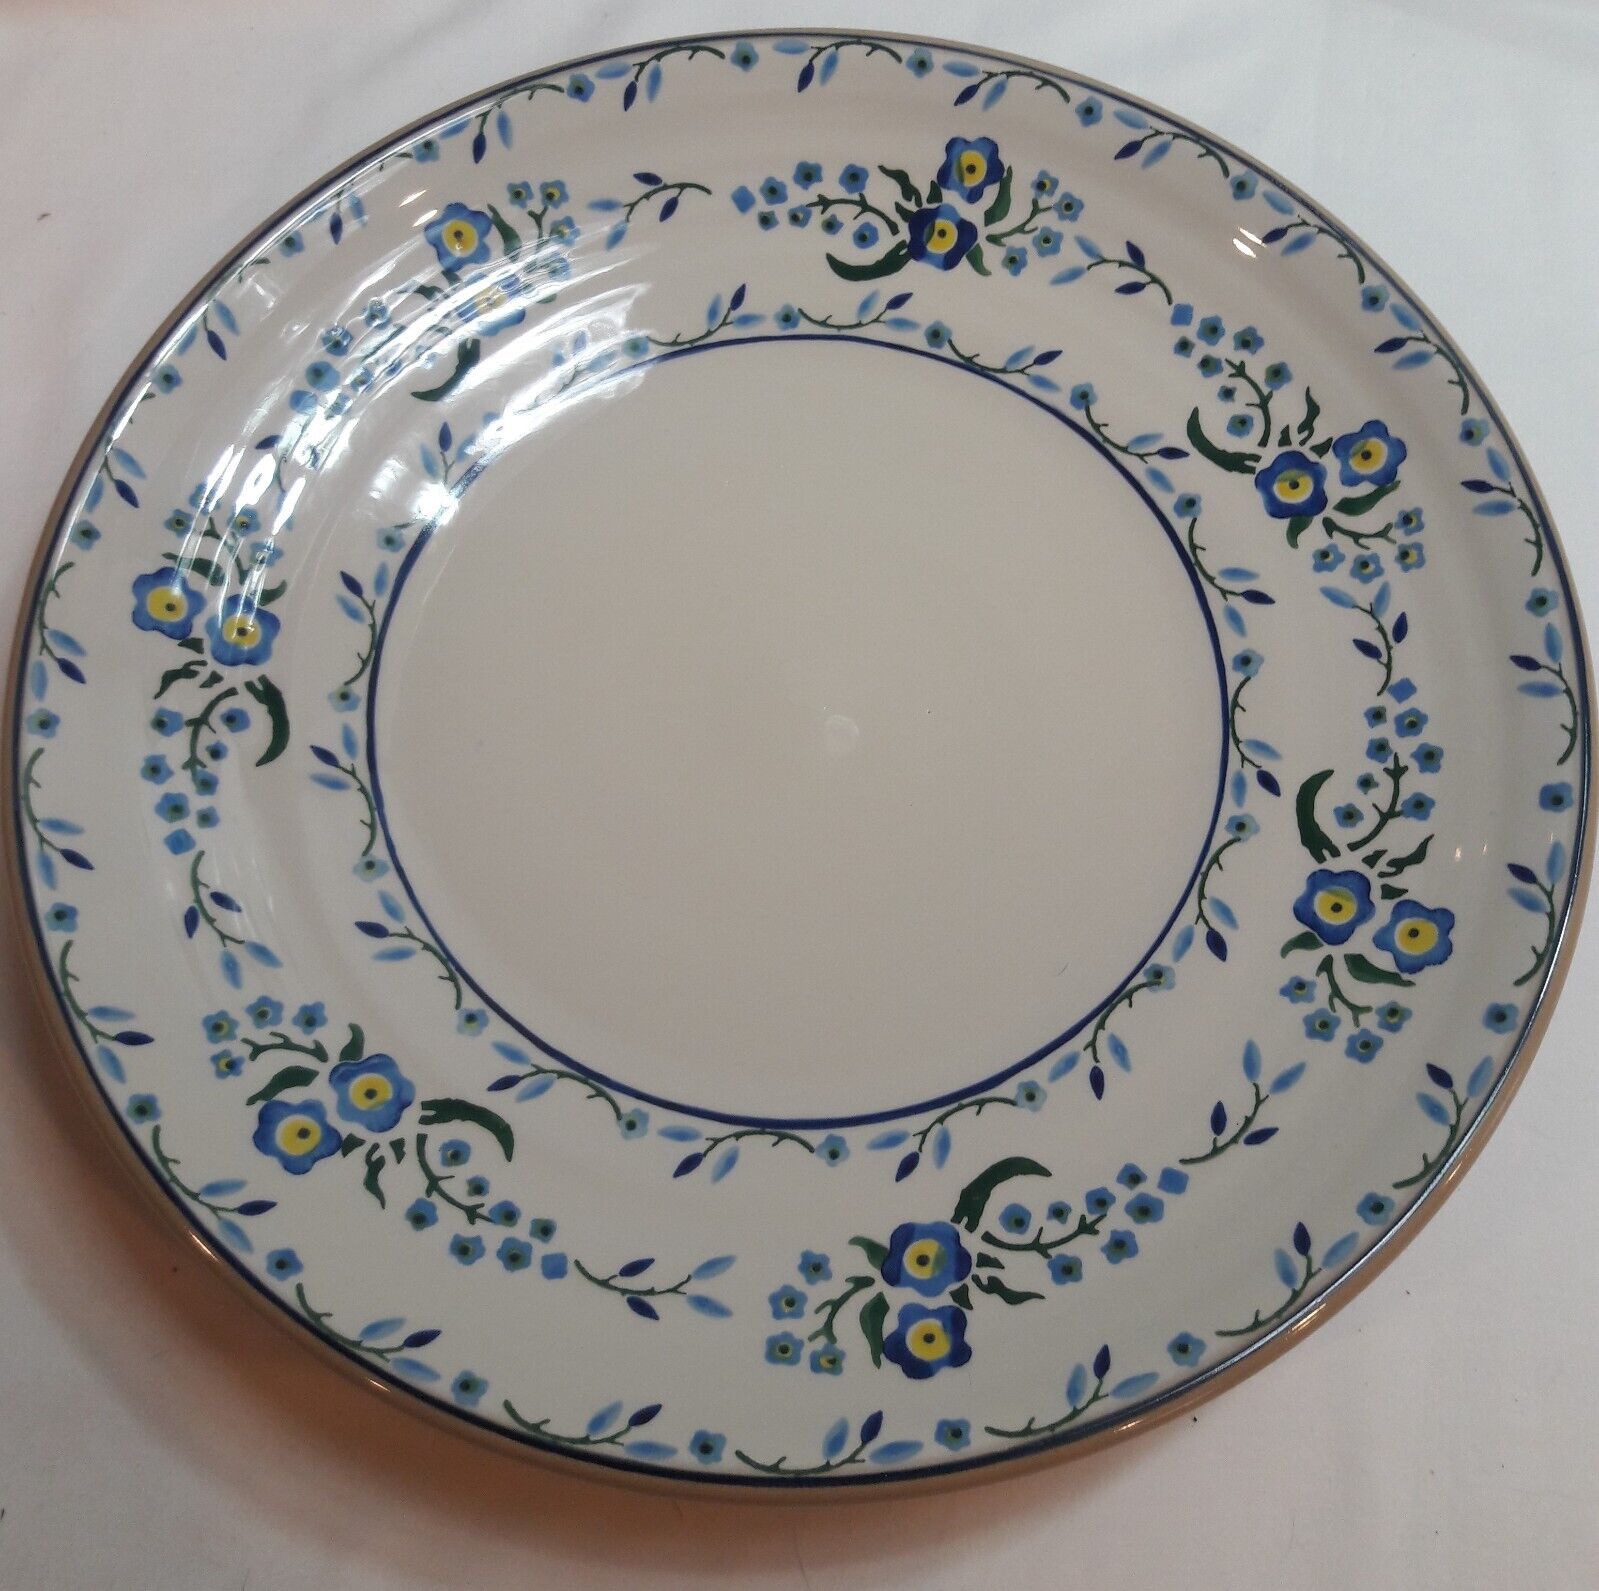 NEW, NICHOLAS MOSSE Forget Me Not Shallow Dish; Made in Ireland